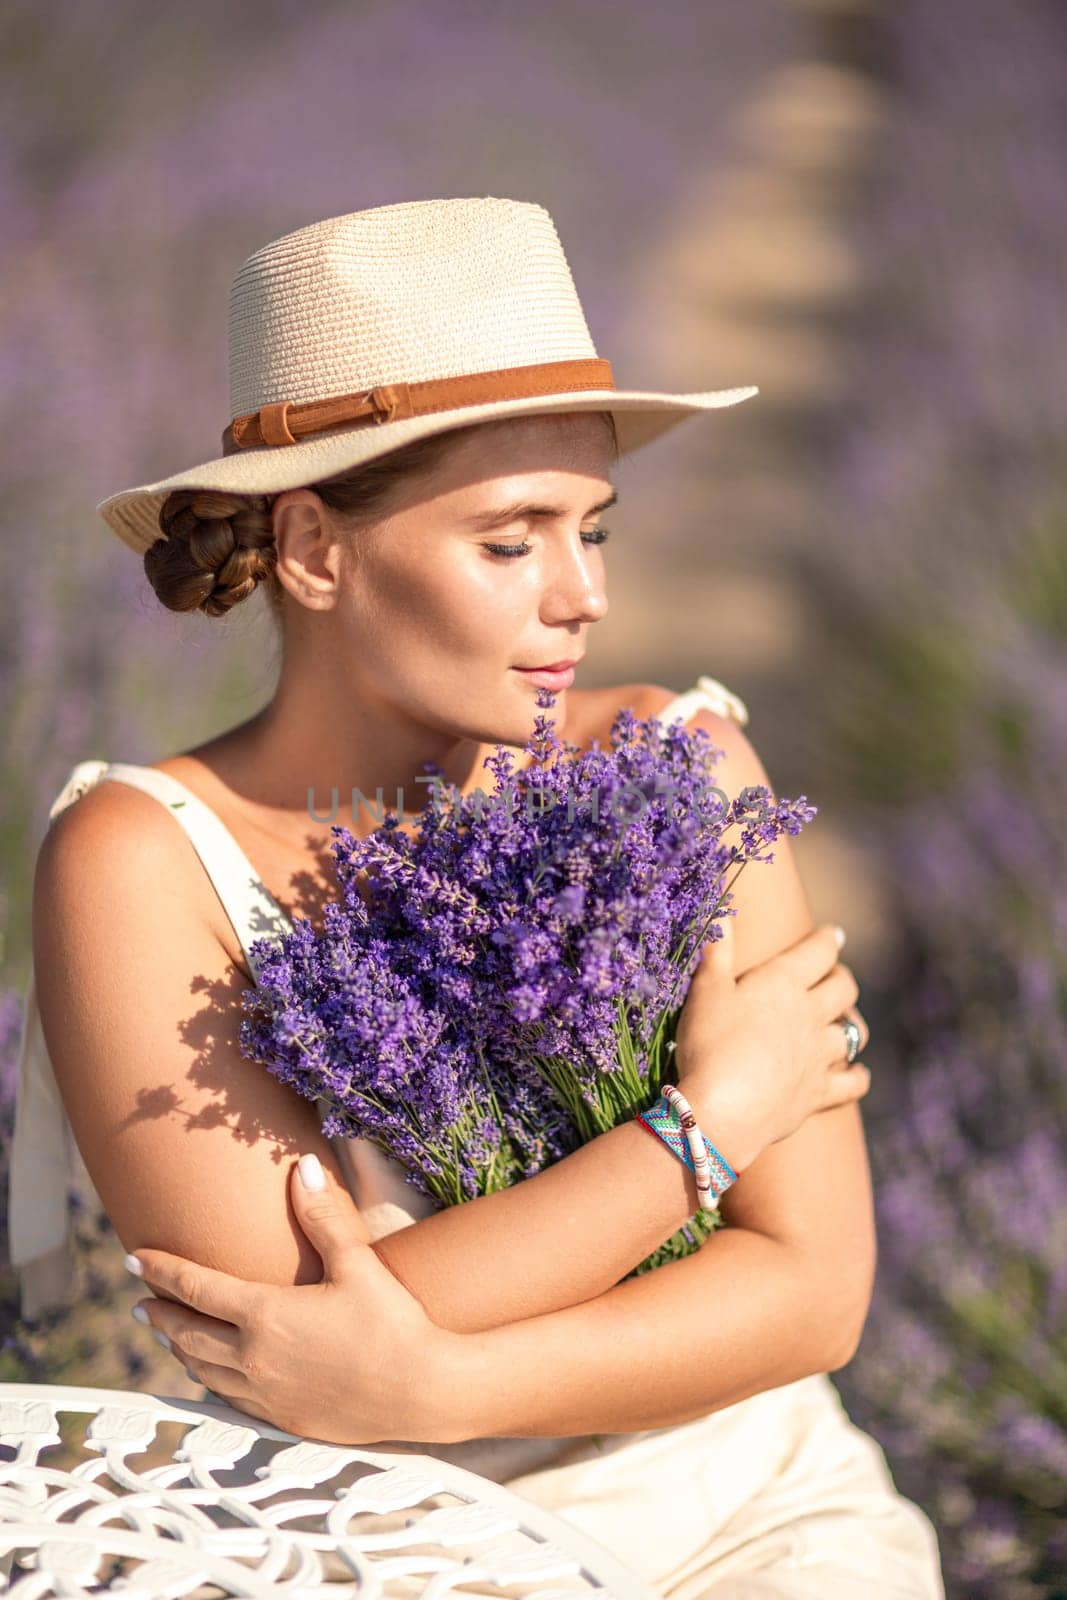 A woman is sitting in a field of lavender flowers and wearing a straw hat. She is smiling and holding a bouquet of flowers. Scene is peaceful and serene, as the woman is surrounded by the beauty of nature.